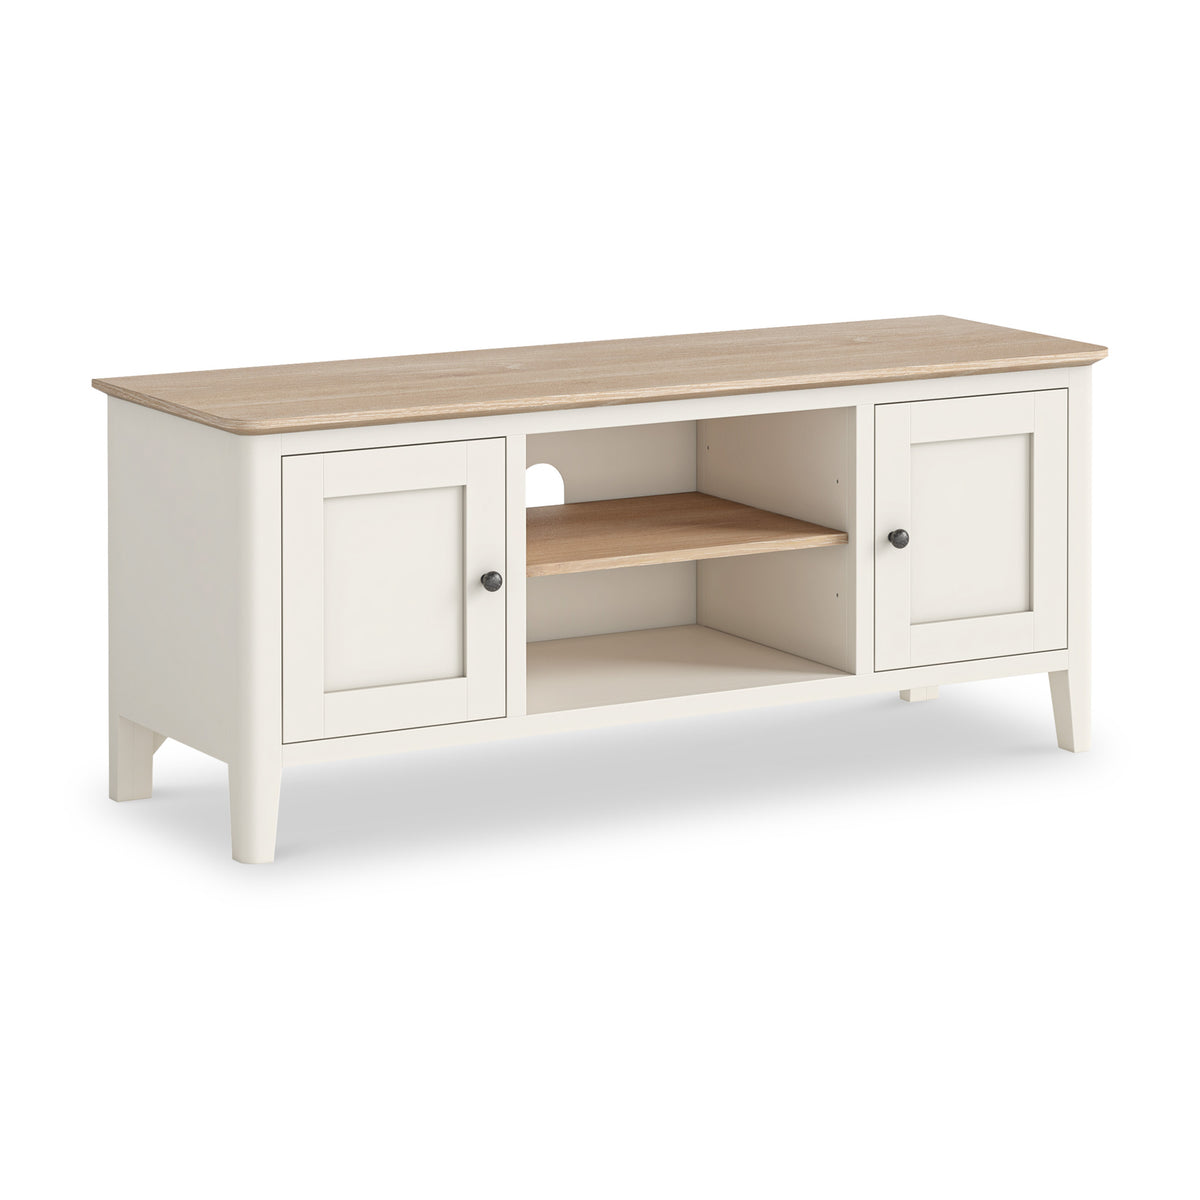 Penrose Coconut White 150cm TV Unit with metal handles from Roseland Furniture